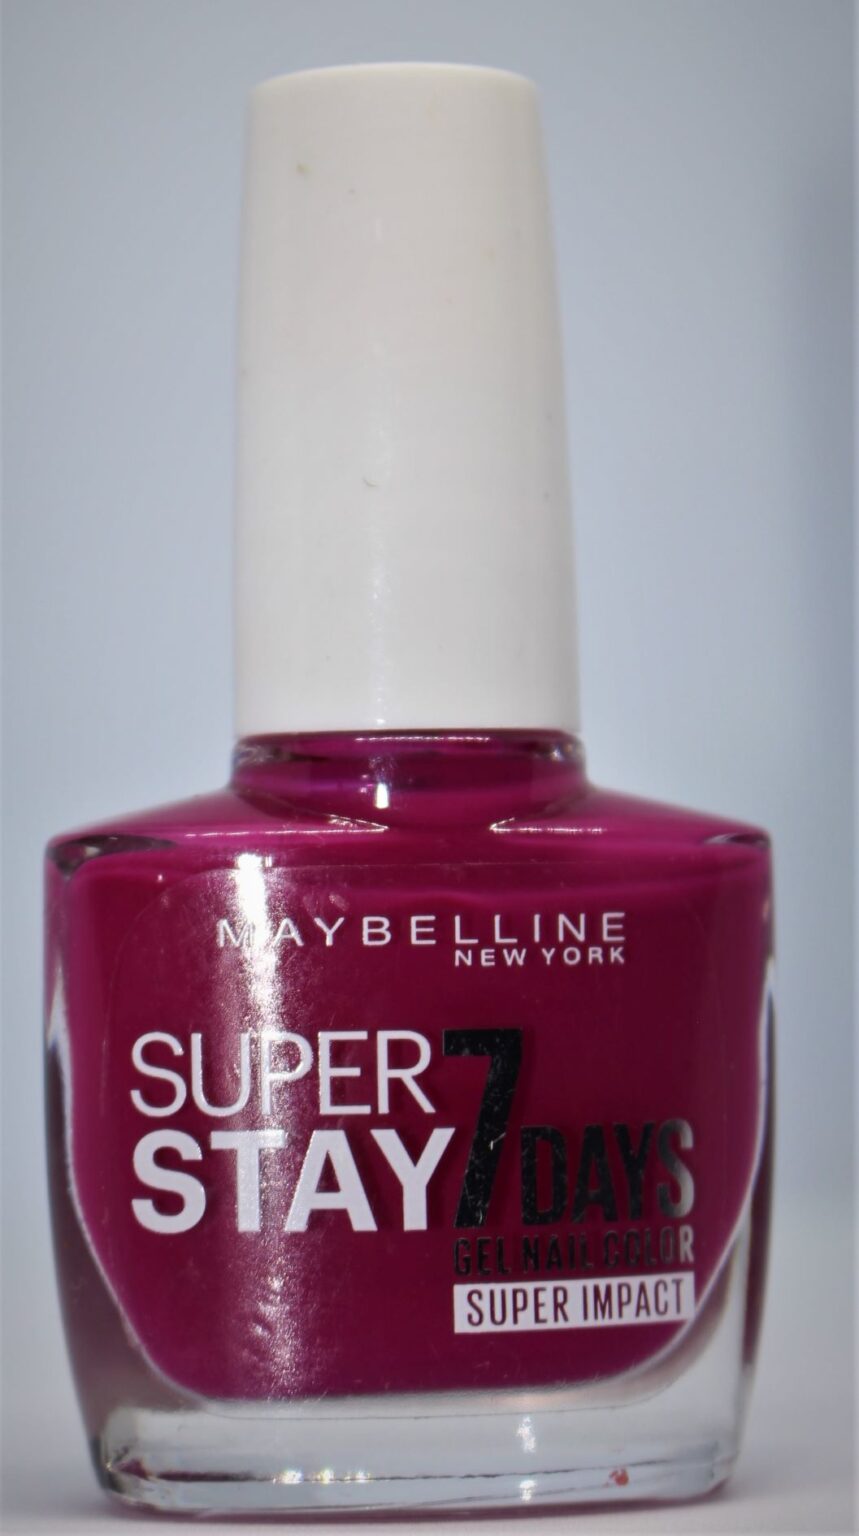 Maybelline Super Stay 7 Days Gel Nail Colour Keshop